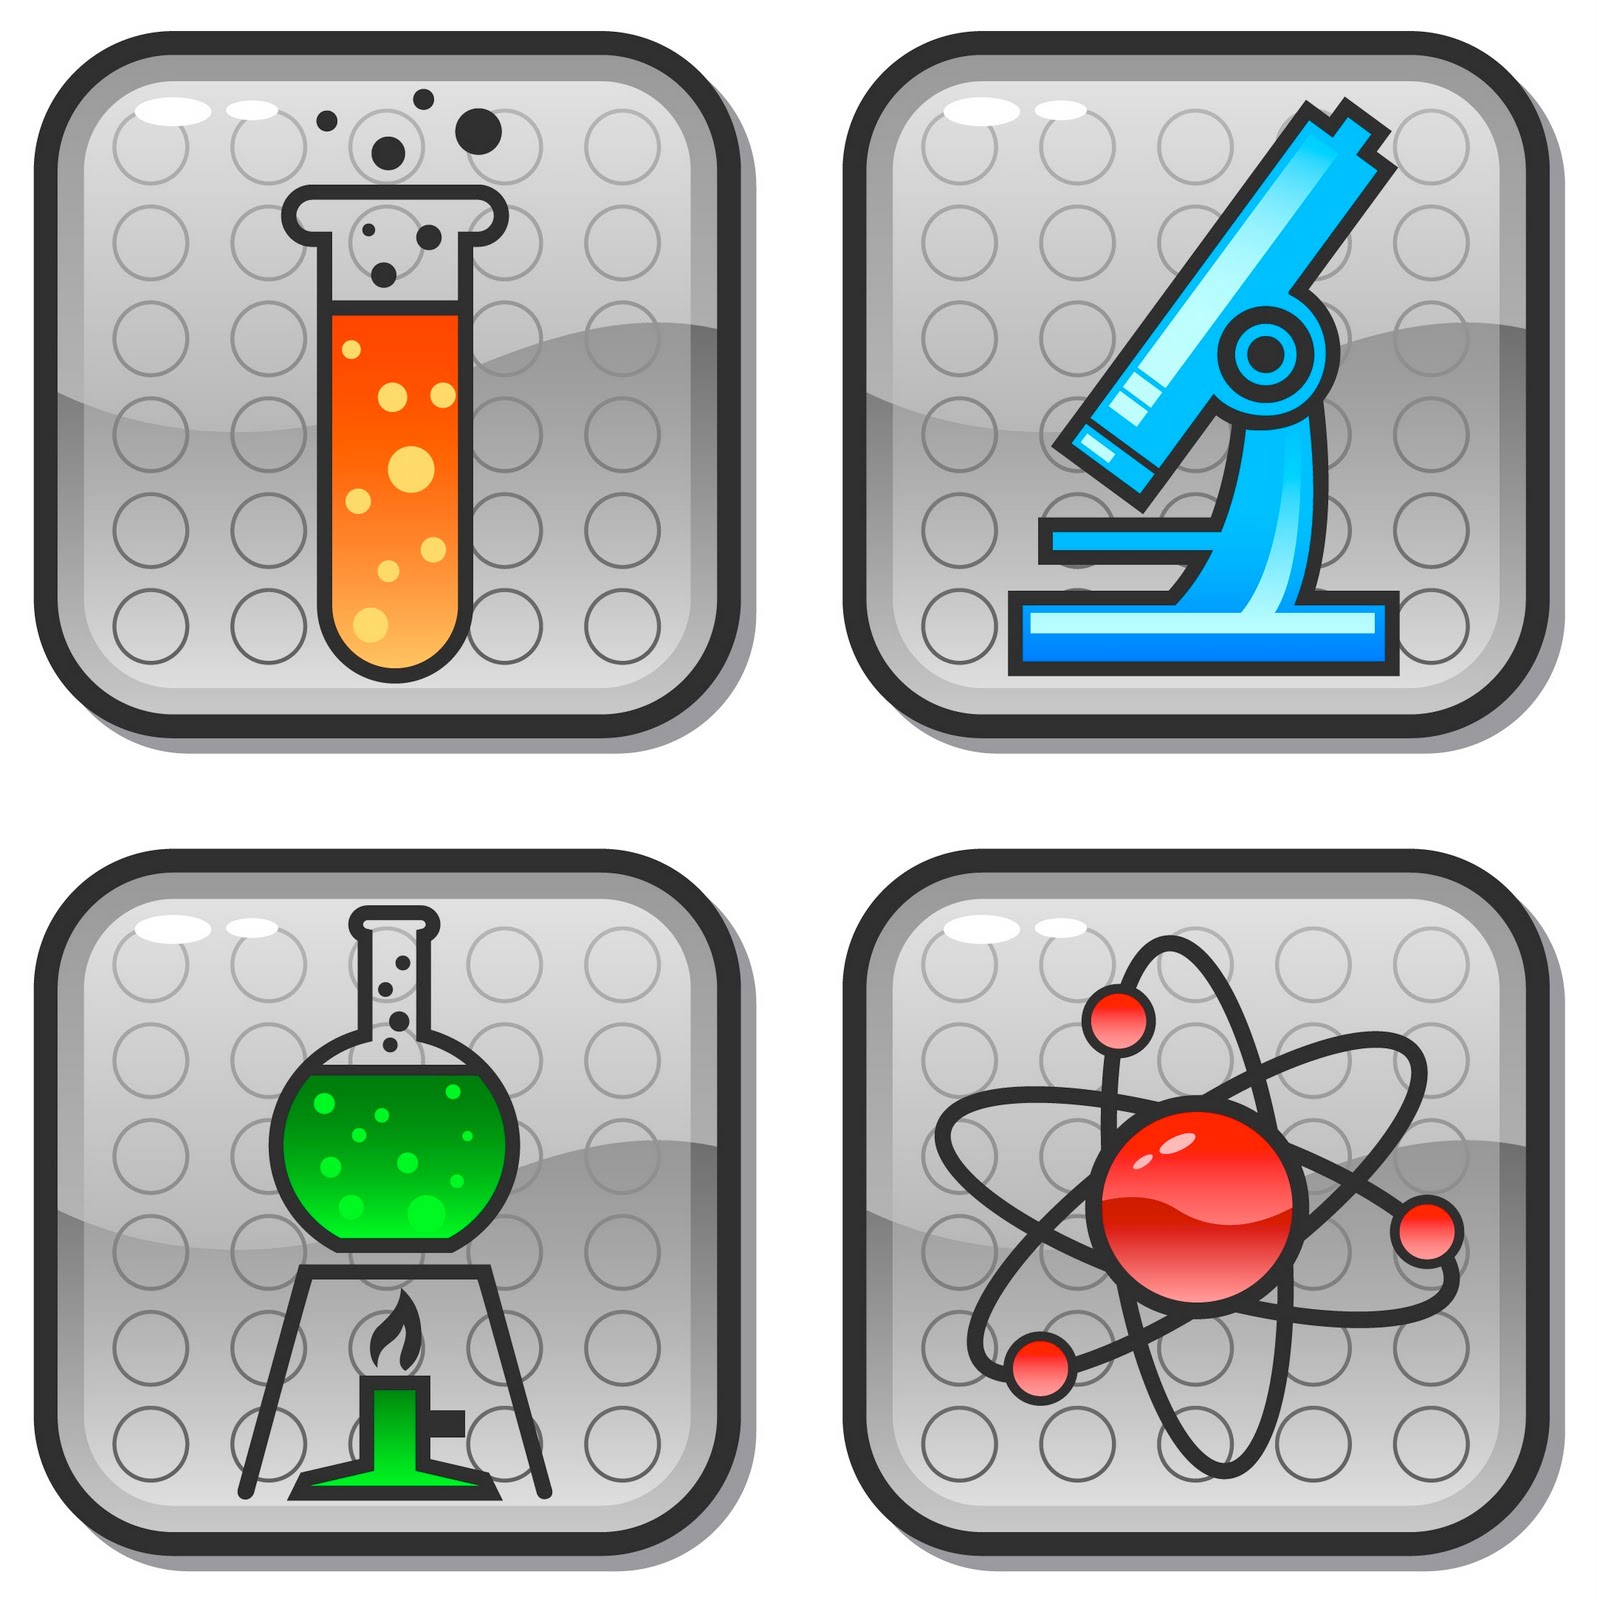 Free science clip art picture